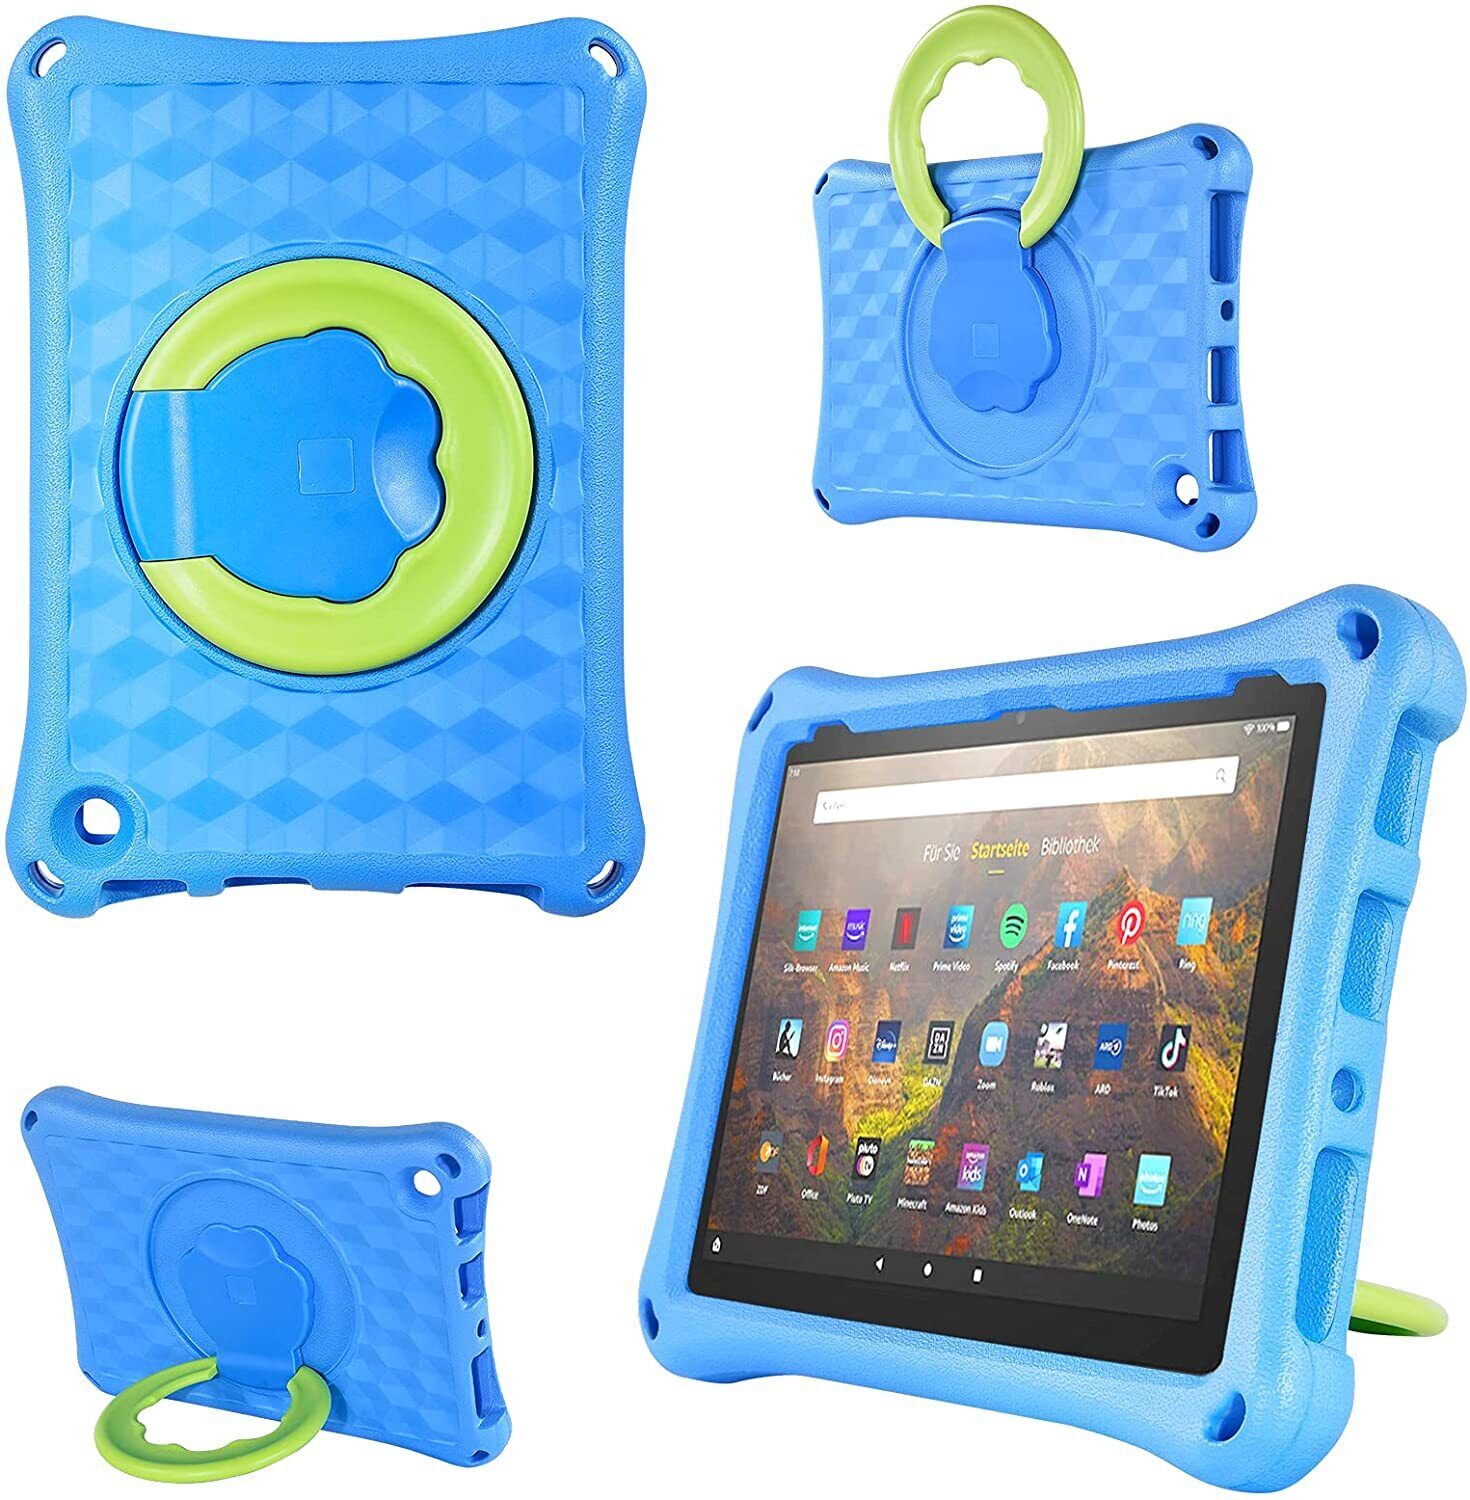 Amazon Fire HD 10 Case Protective Cover For Kindle Fire HD 10.1